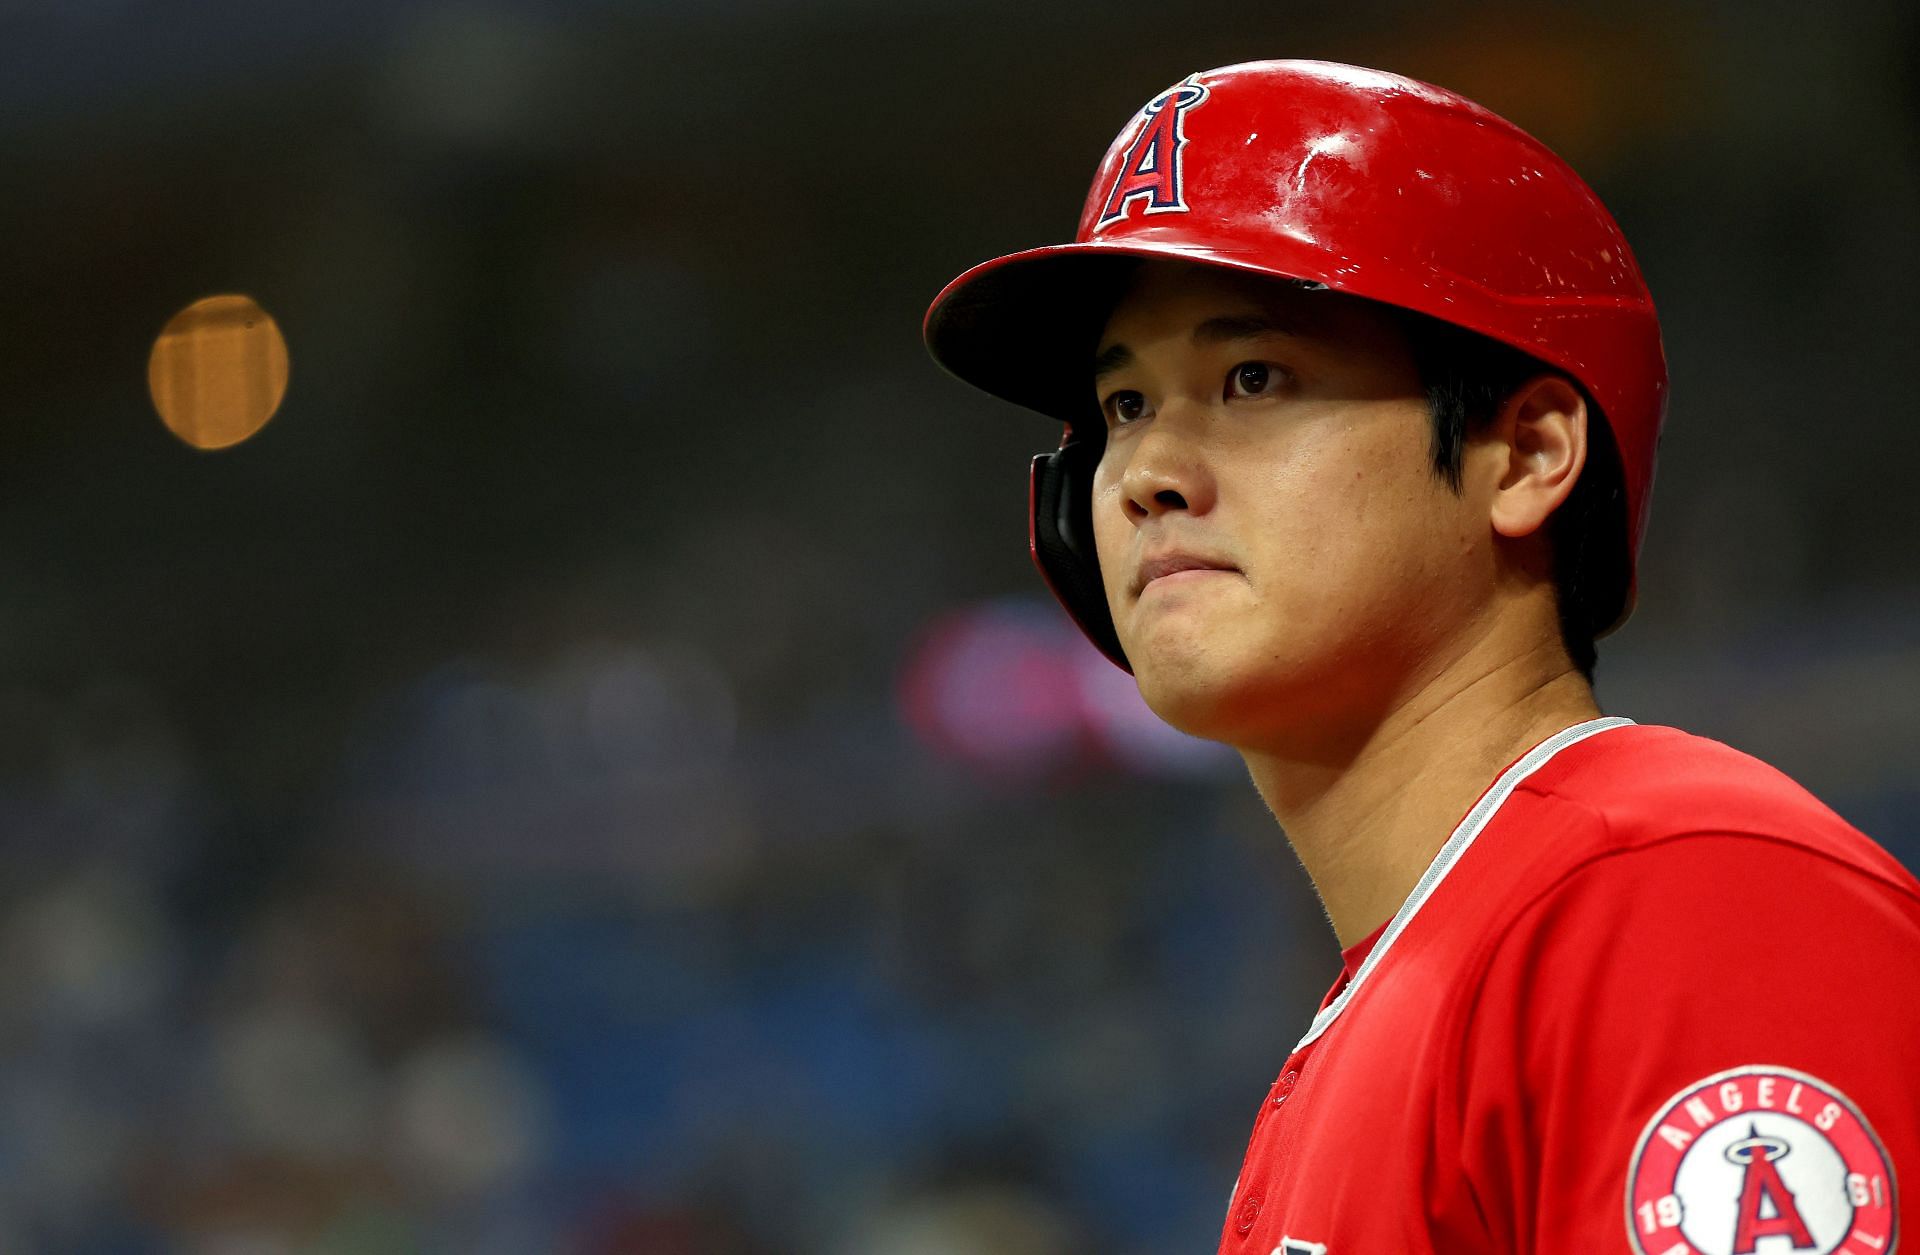 Shohei Ohtani: Looking forward for the opportunityto play in